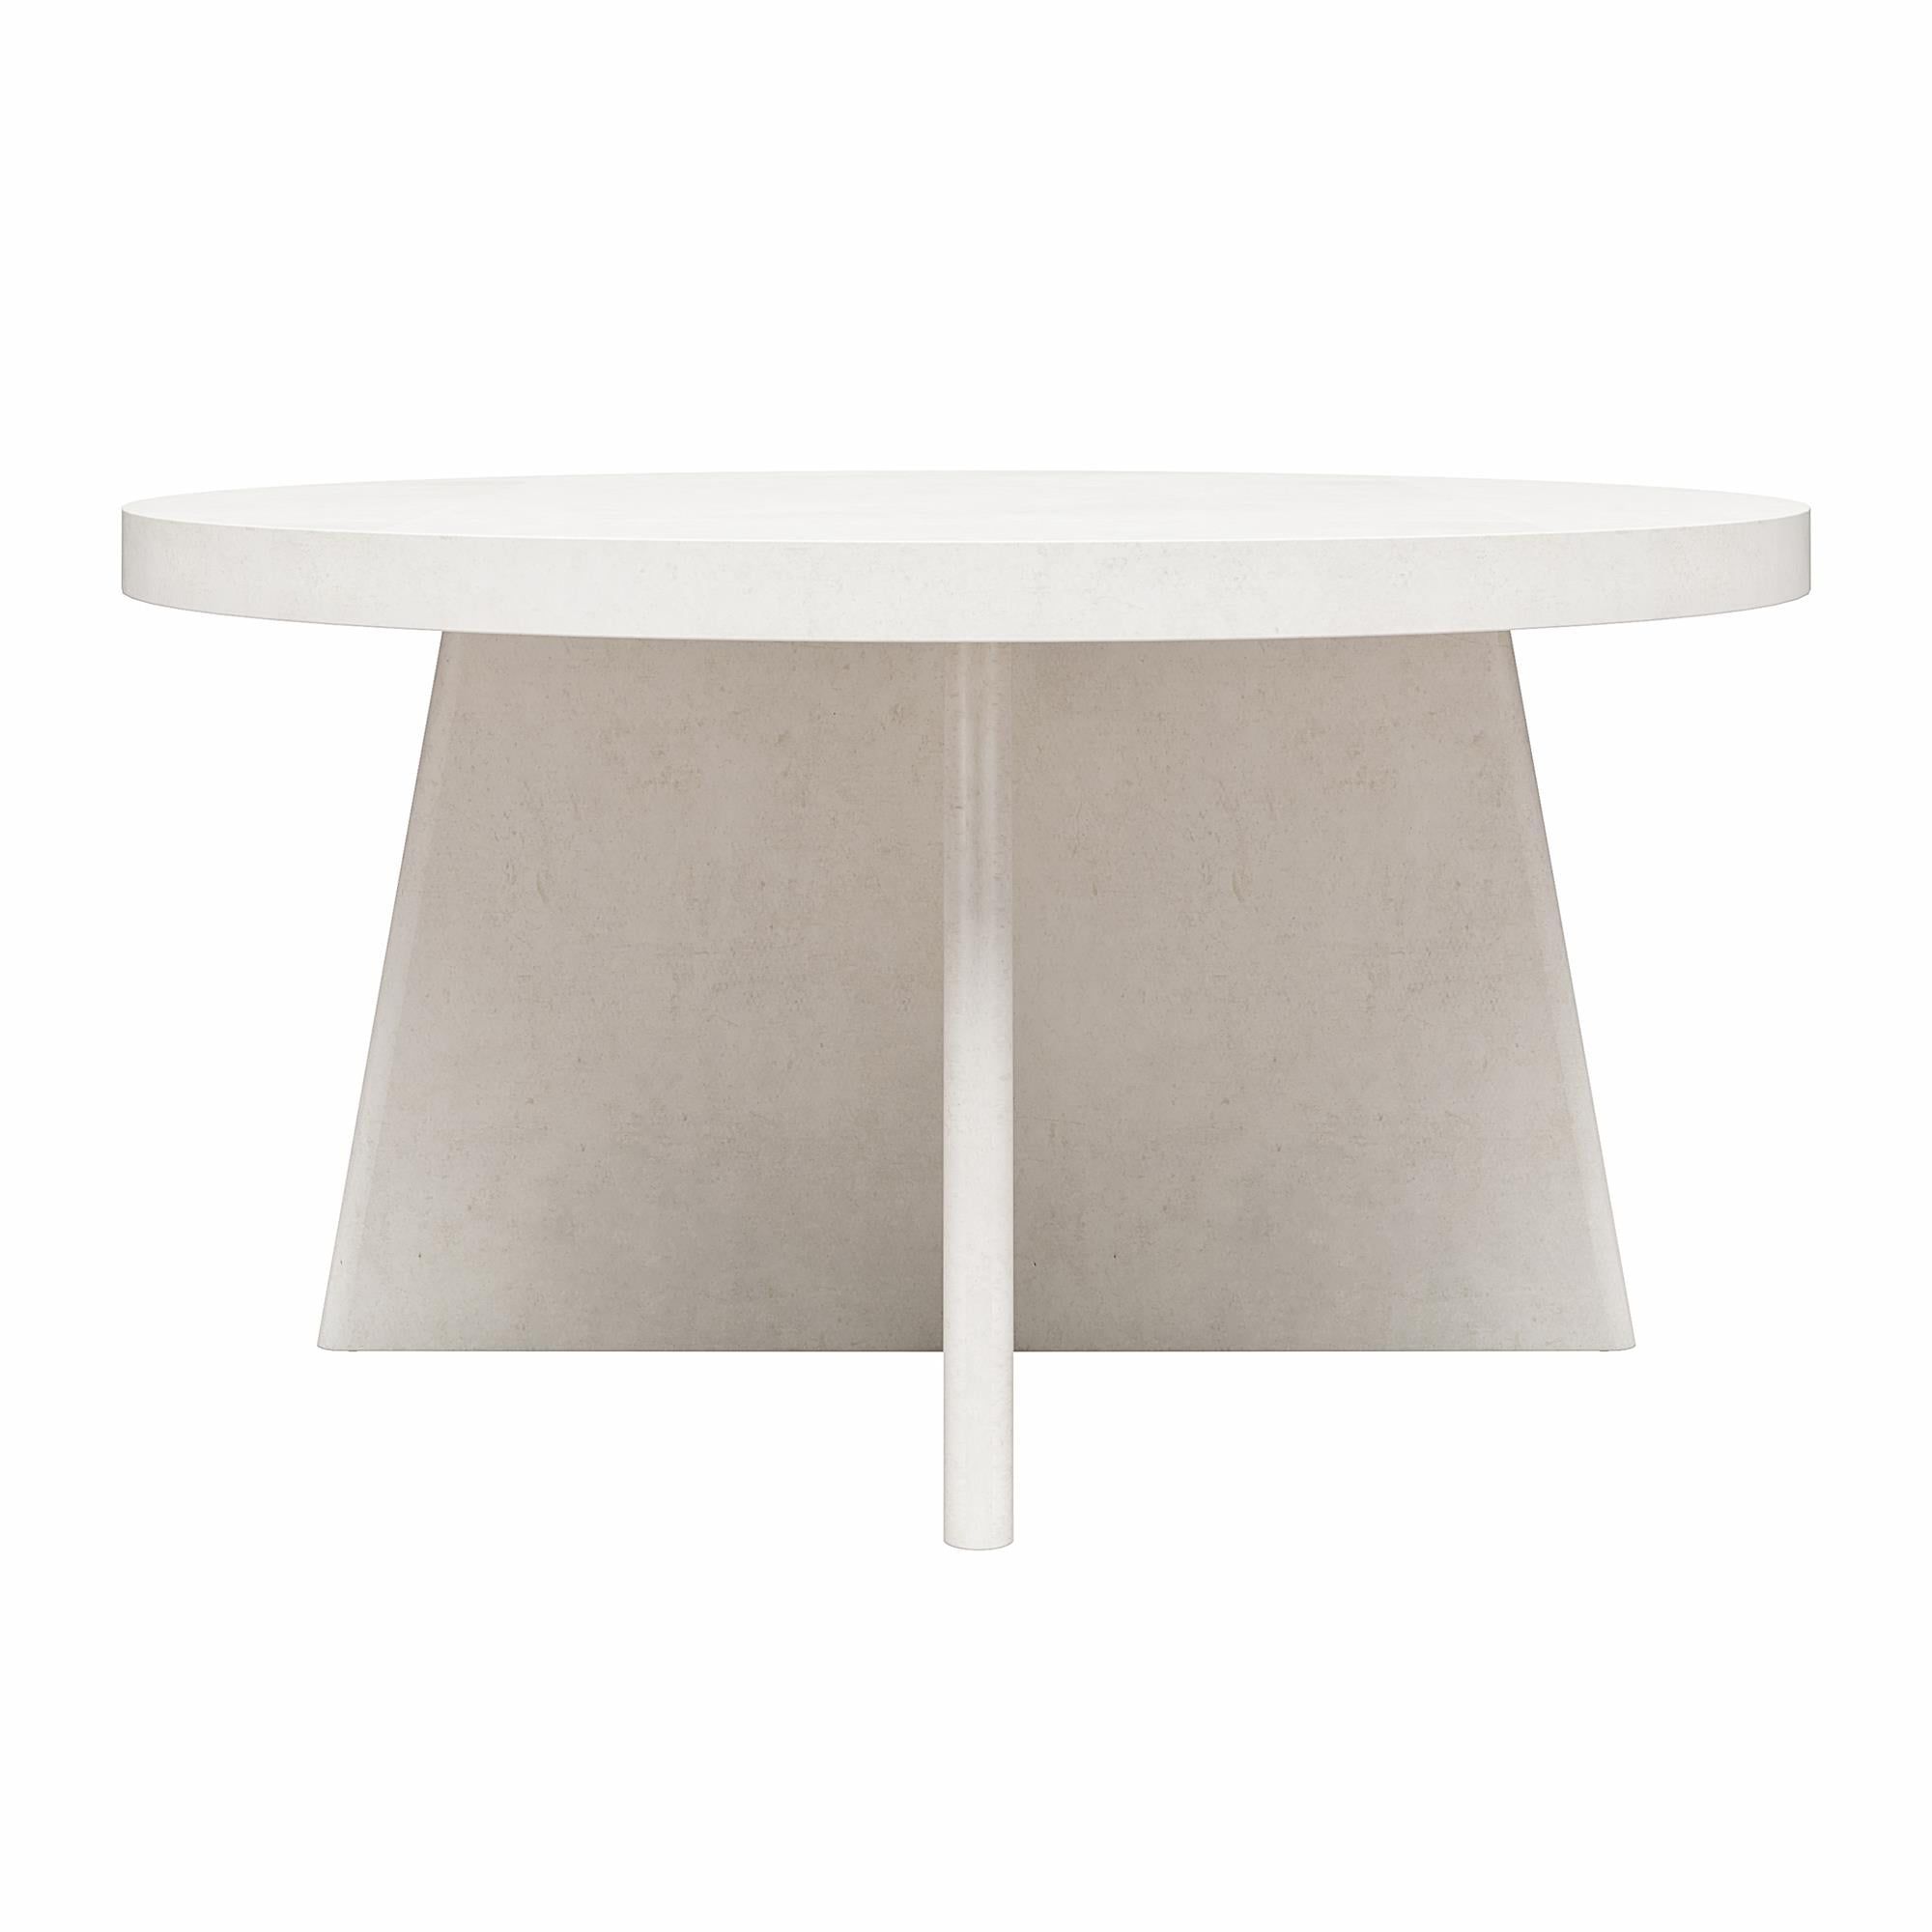 Queer Eye Liam Round Coffee Table, Plaster – Walmart Intended For Current Liam Round Plaster Coffee Tables (View 7 of 15)